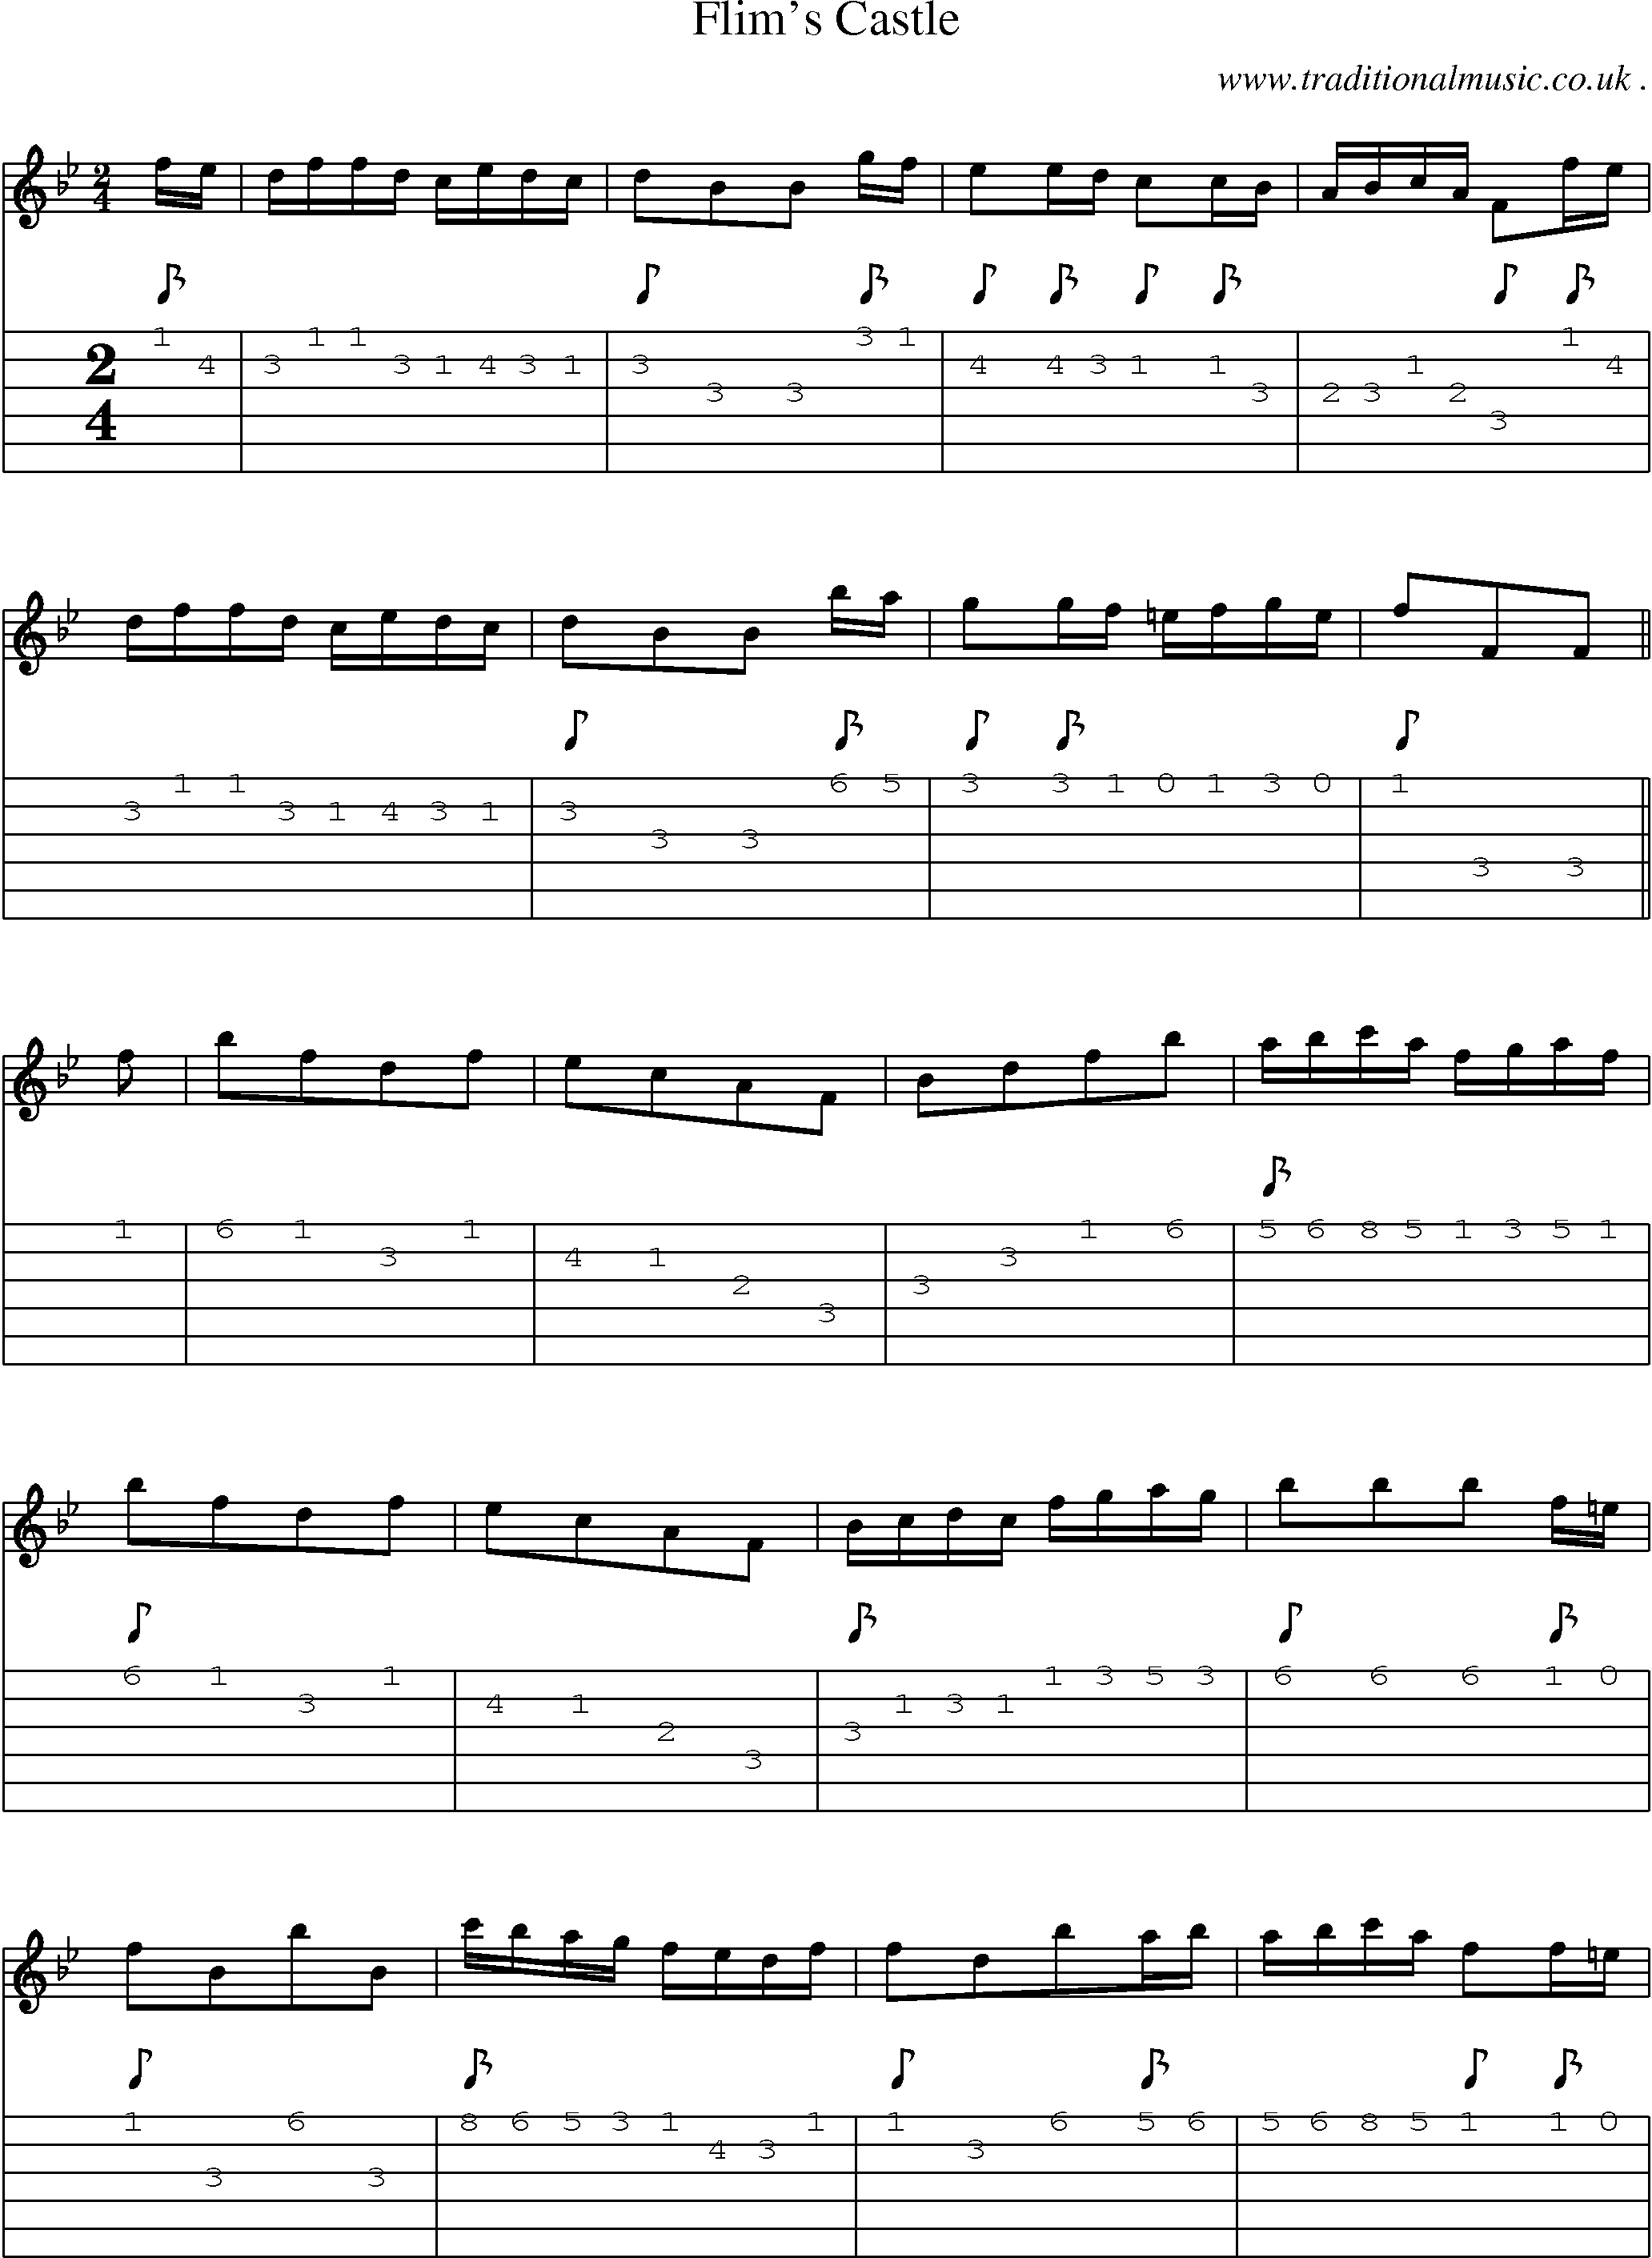 Sheet-Music and Guitar Tabs for Flims Castle